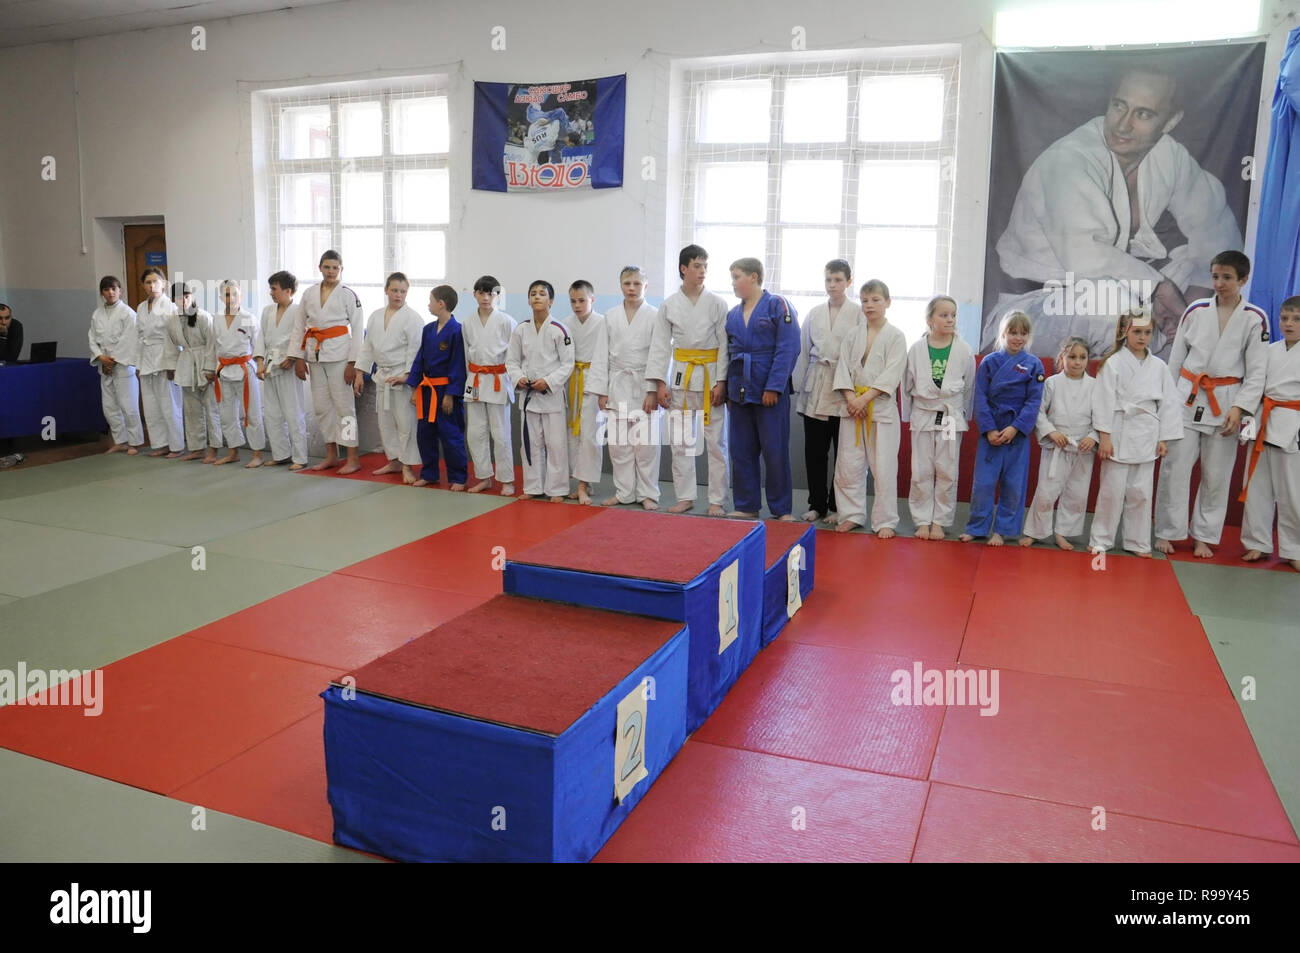 Kovrov, Russia. 26 April 2014. Competitions Judo in sports complex Vympel. Competitors lined up for the awarding ceremony. Portrait of President Vladi Stock Photo